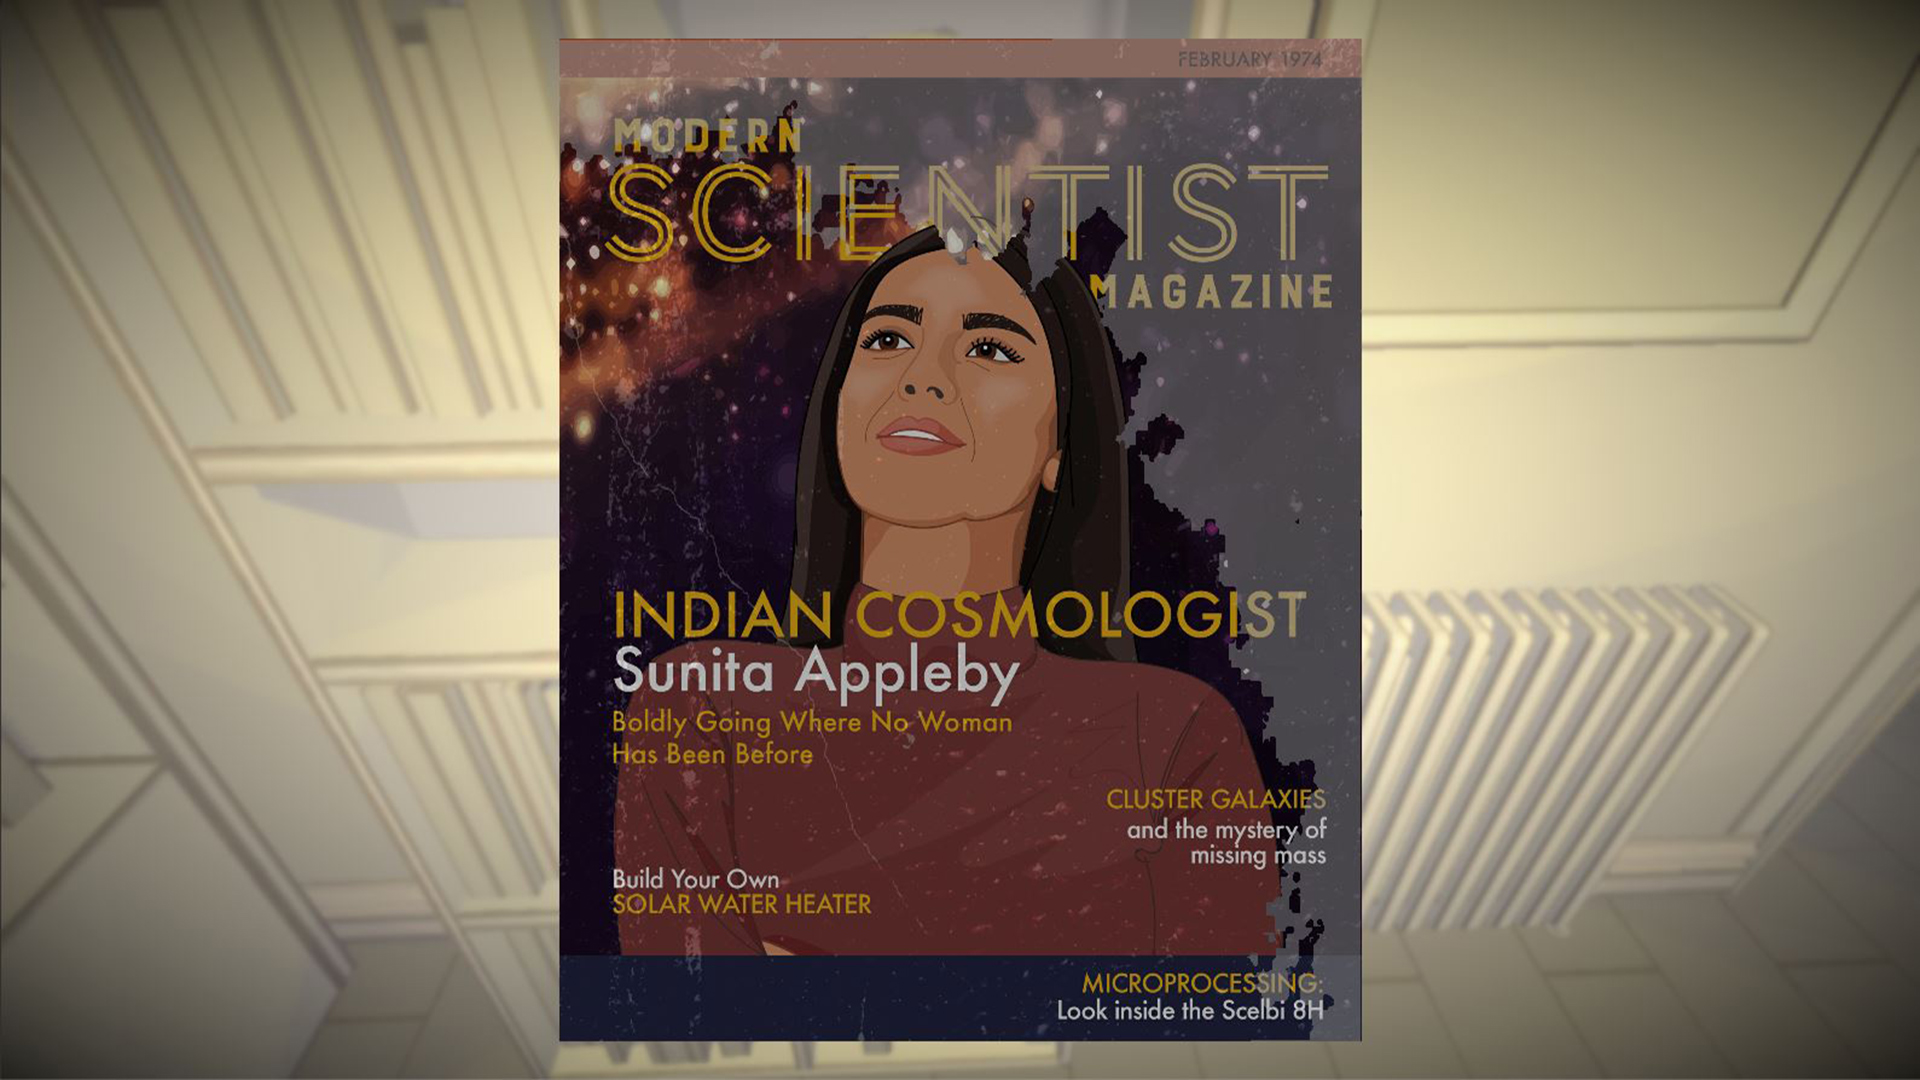 A magazine cover that reads Modern Scientist Magazine with a photo of a woman on the front